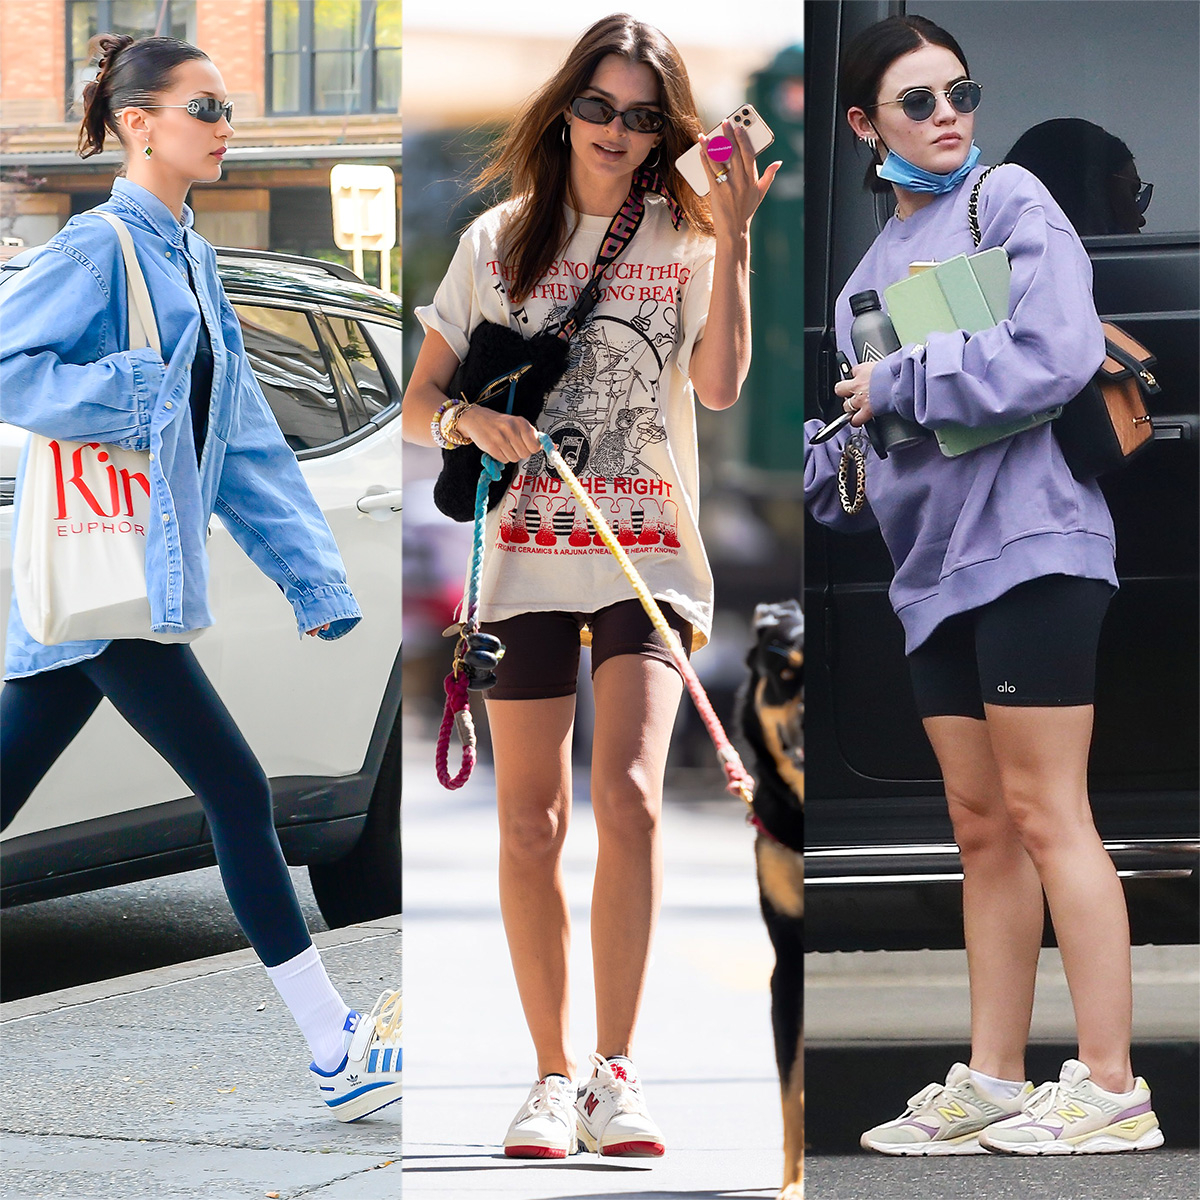 Ophef gereedschap films Retro Sneakers Are the Latest Trend It Girls Have Claimed - E! Online